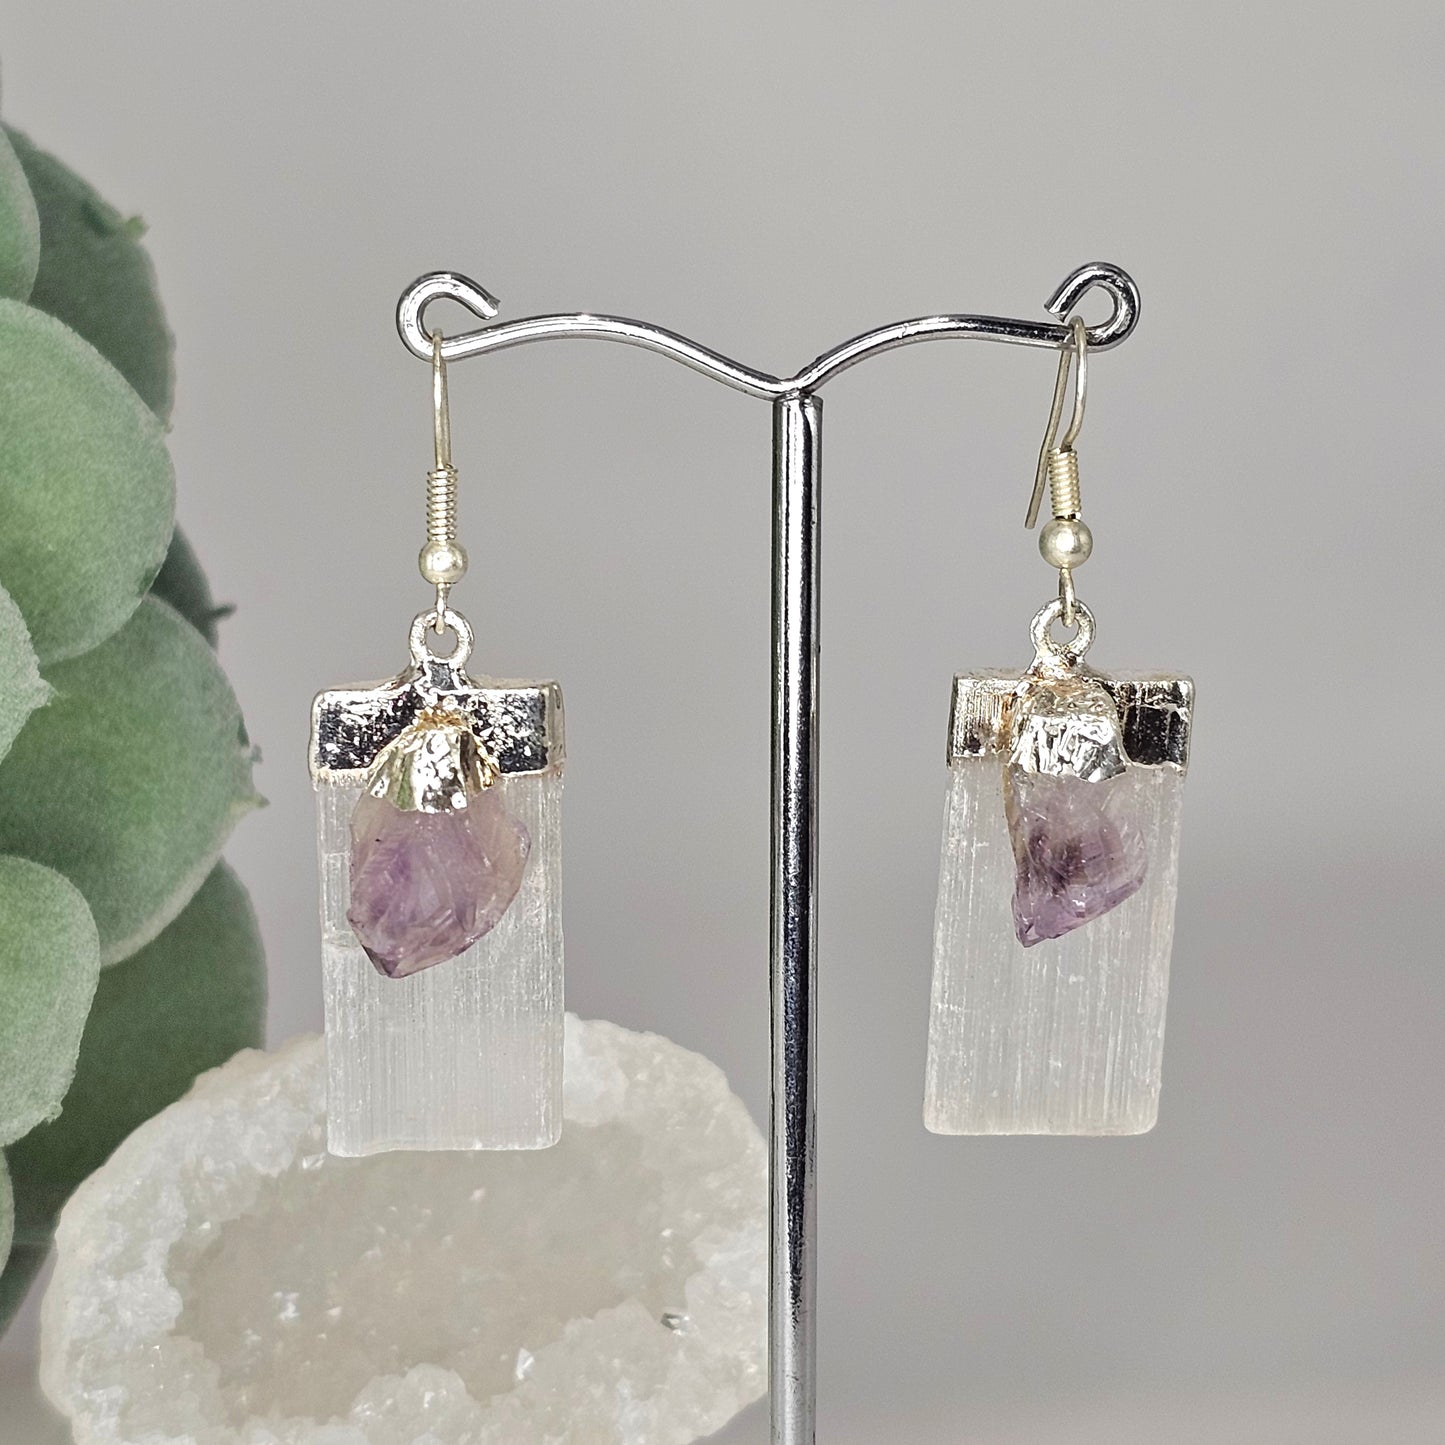 Brazilian Selenite and Amethyst silver plated earrings with hypo-allergenic ear wires.